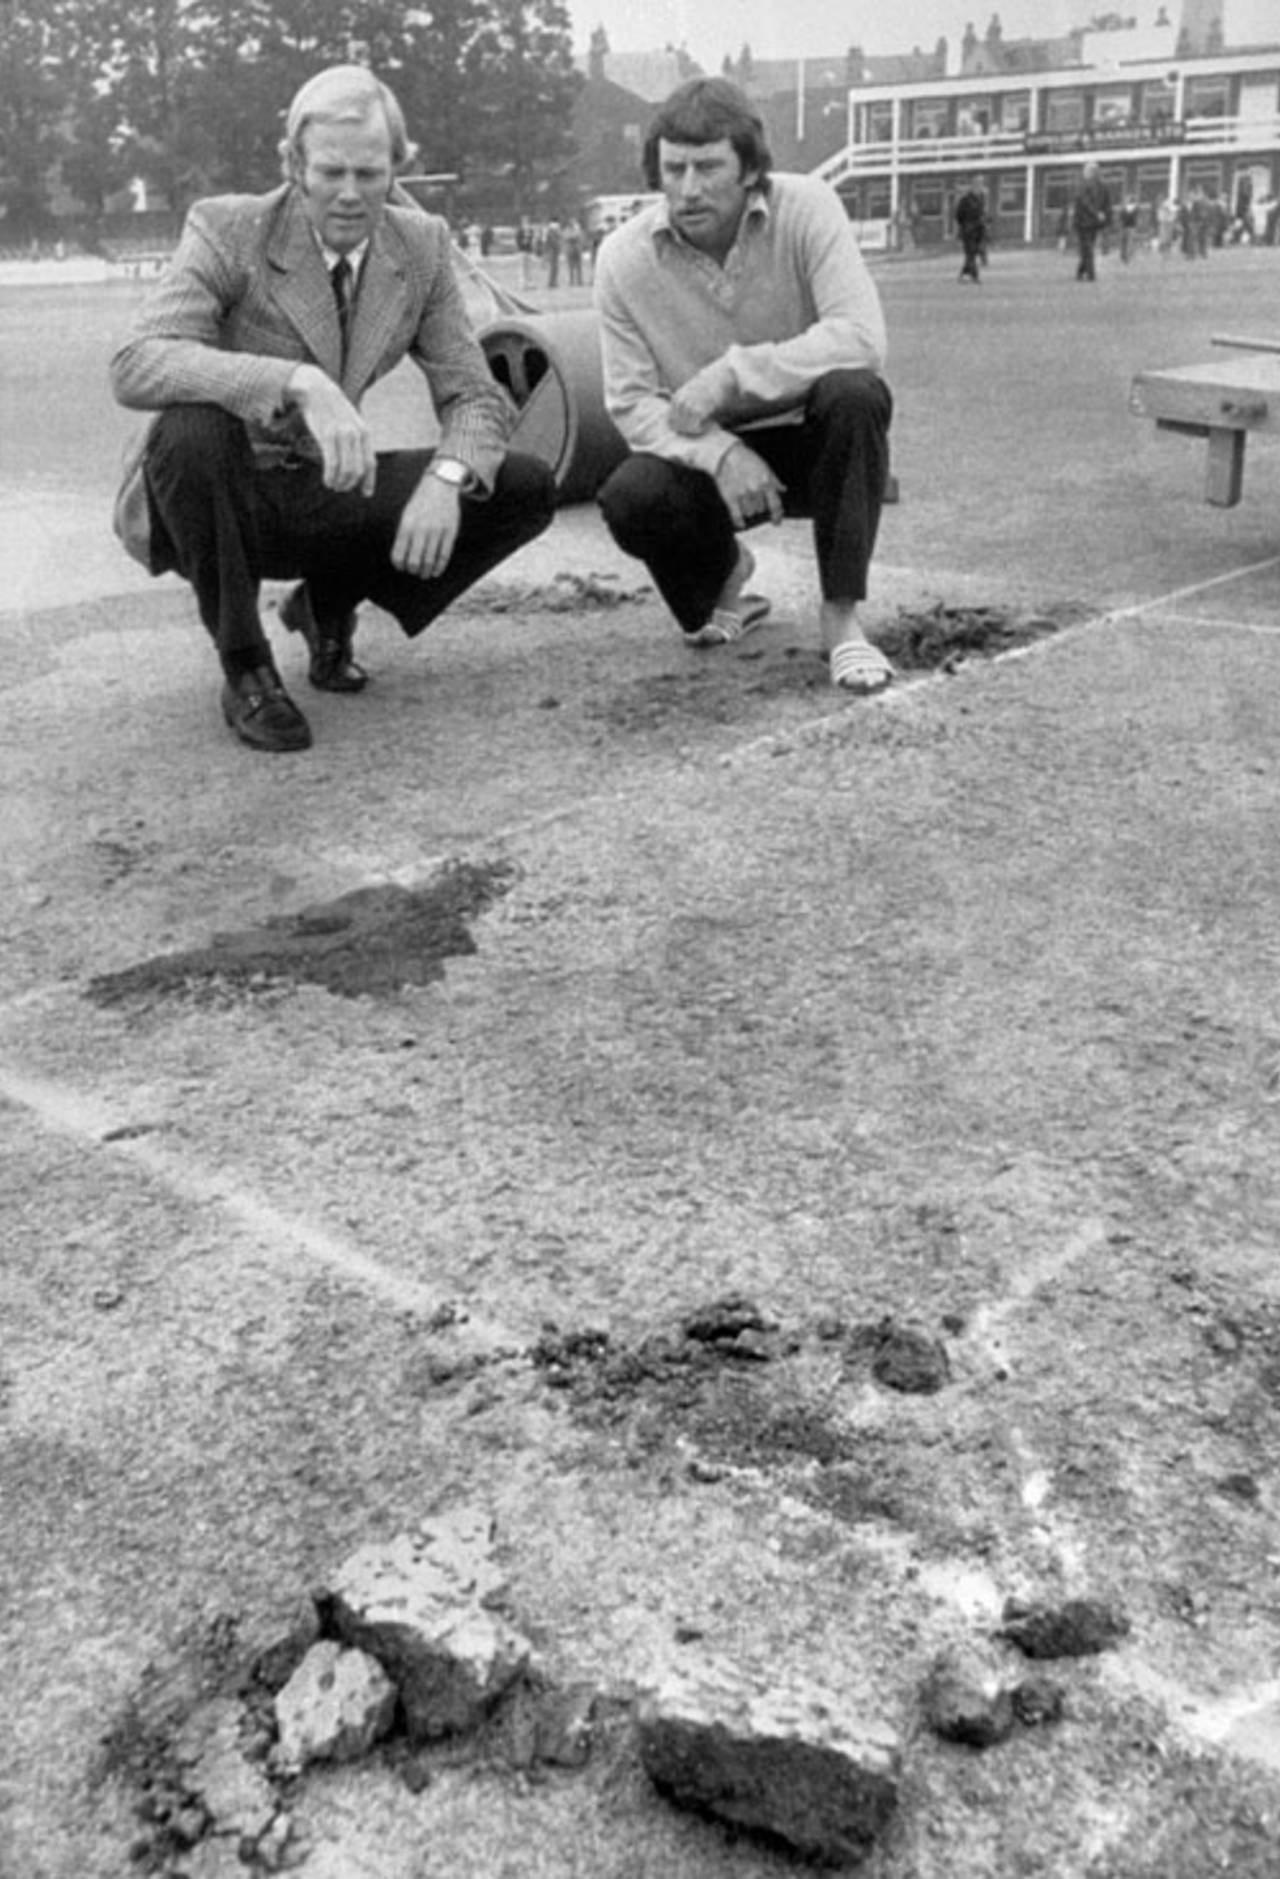 Tony Greig and Ian Chappell inspect the pitch at Headingley after vandals dug it up&nbsp;&nbsp;&bull;&nbsp;&nbsp;Getty Images